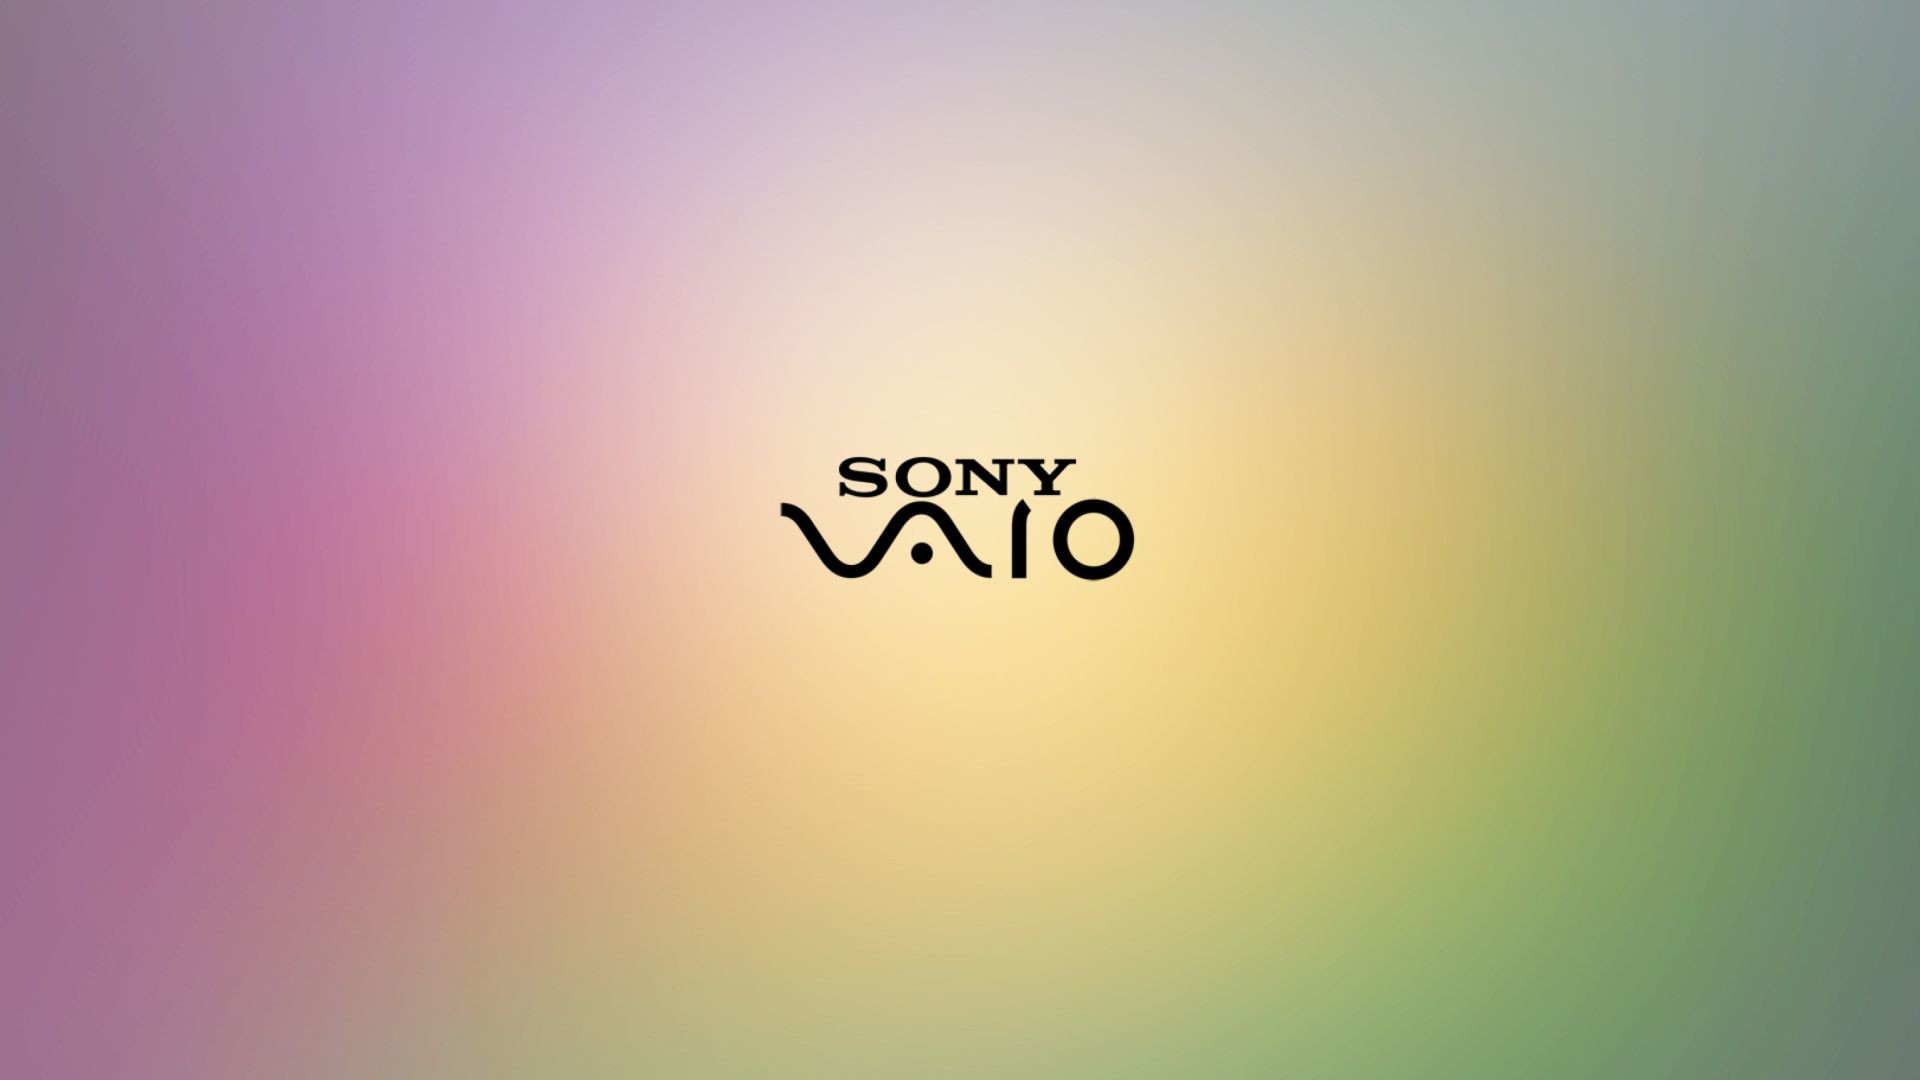 1920x1080 Sony vaio wallpapers desktop and mobile images photos jpg  Sony  vaio hd wallpaper